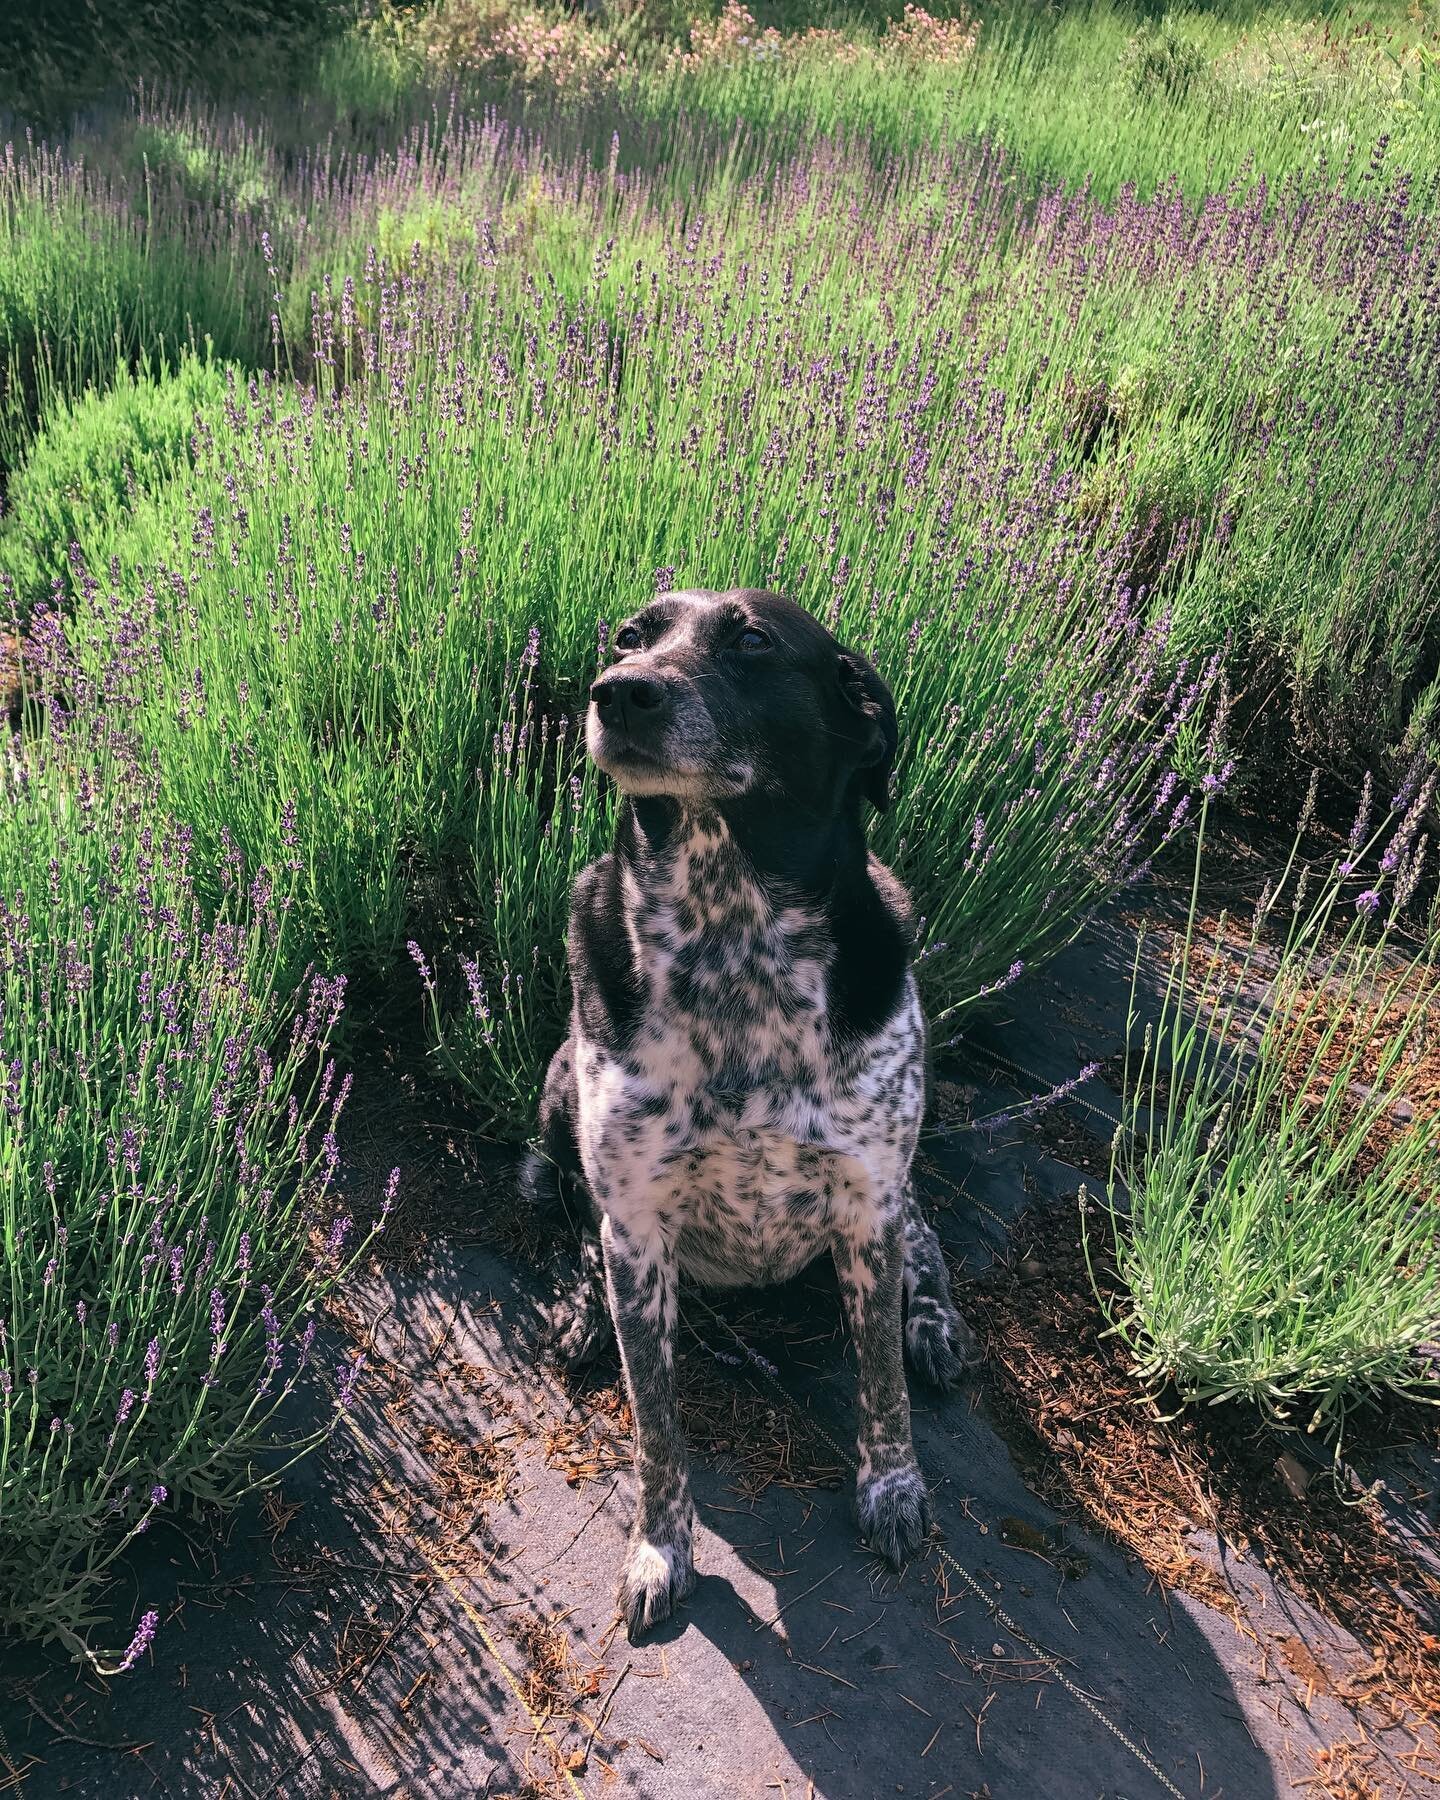 This is a tough post to share&hellip;
We lost our best girl, our lavender farm mascot Jelly Bug a month ago today. 
Our lack of online presence has shown, but grief is definitely the real deal.
We have been helping our hearts heal by planting and gro